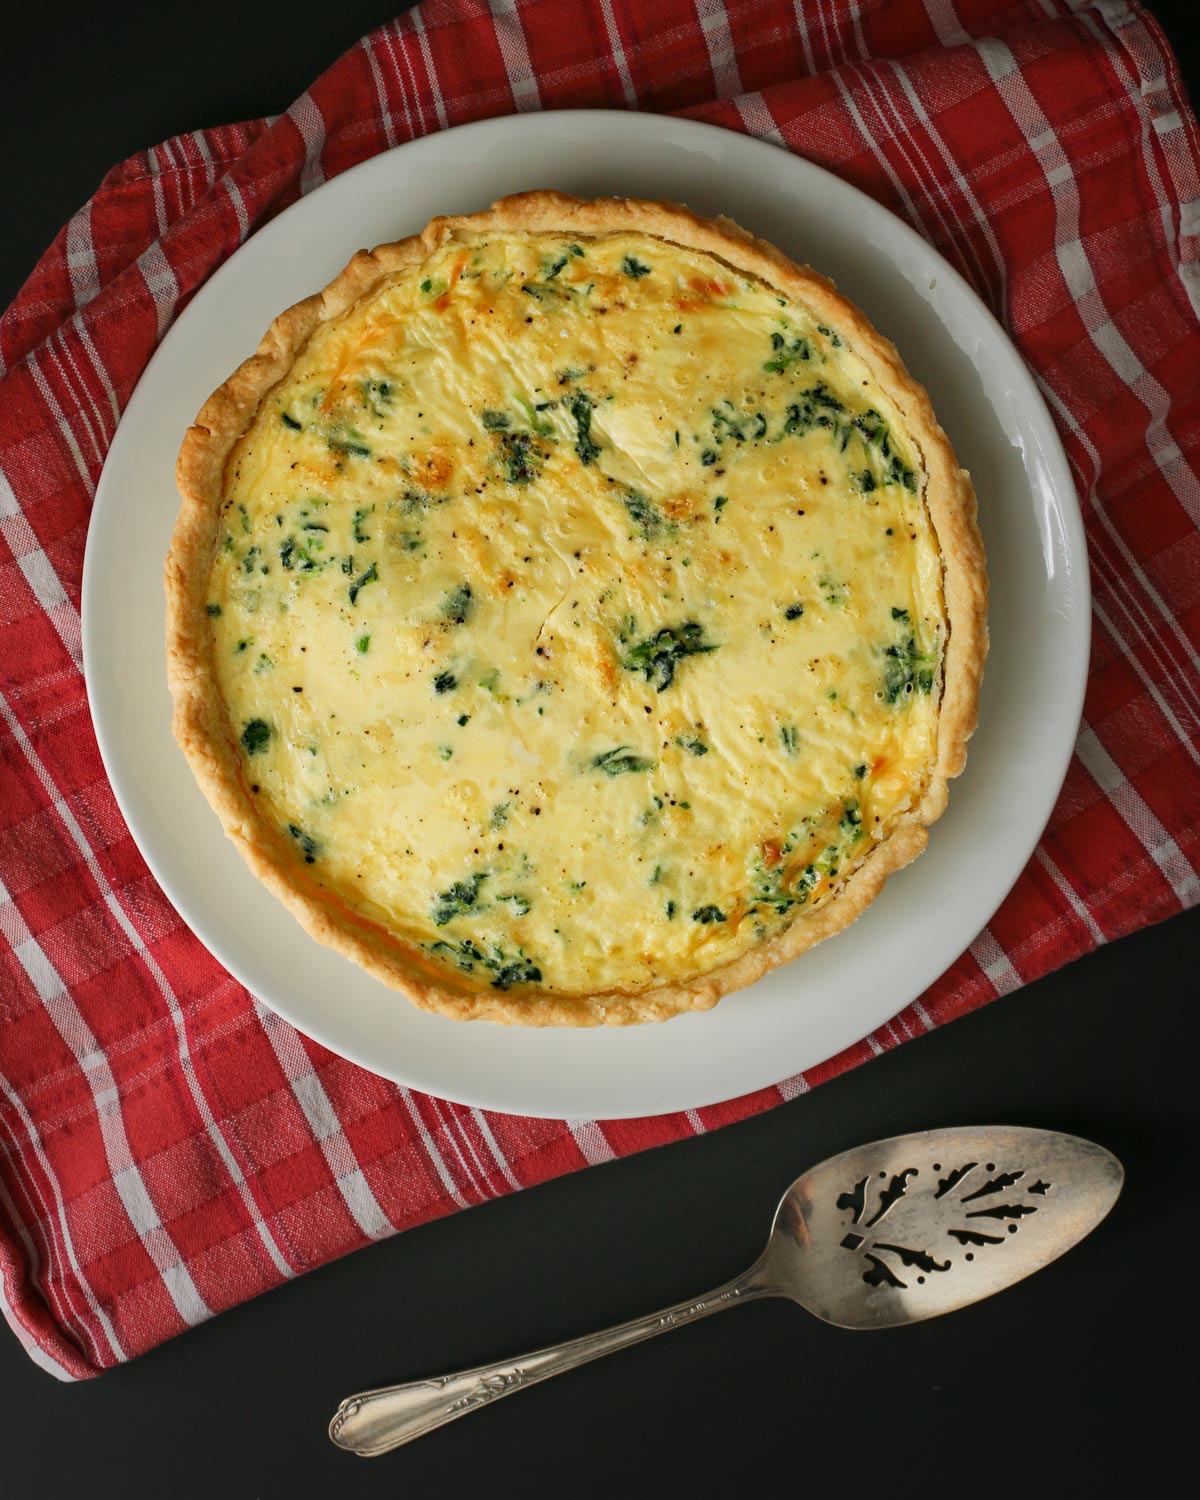 fully baked quiche florentine on red and white cloth with pie server.